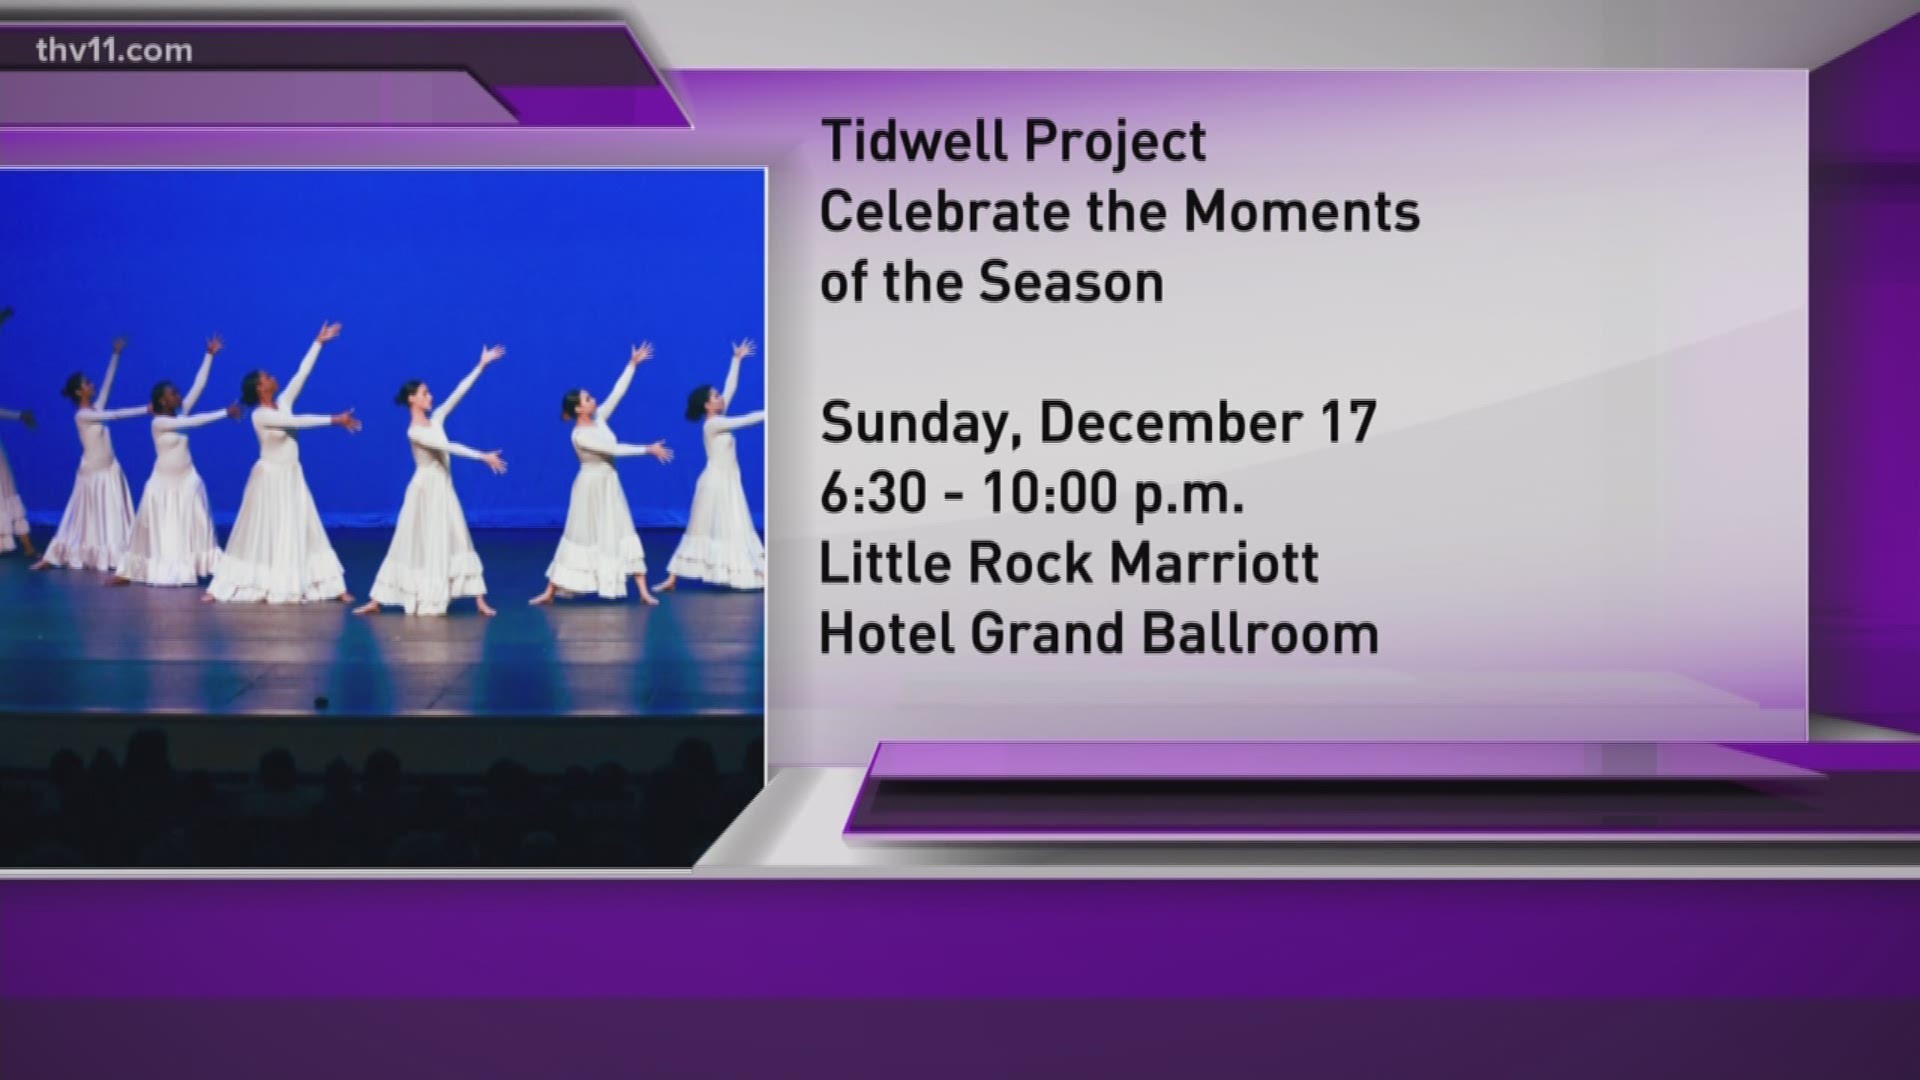 The Tidwell Project provides a place for talented students to participate in performing arts-- while also building self-esteem, self-respect and discipline.